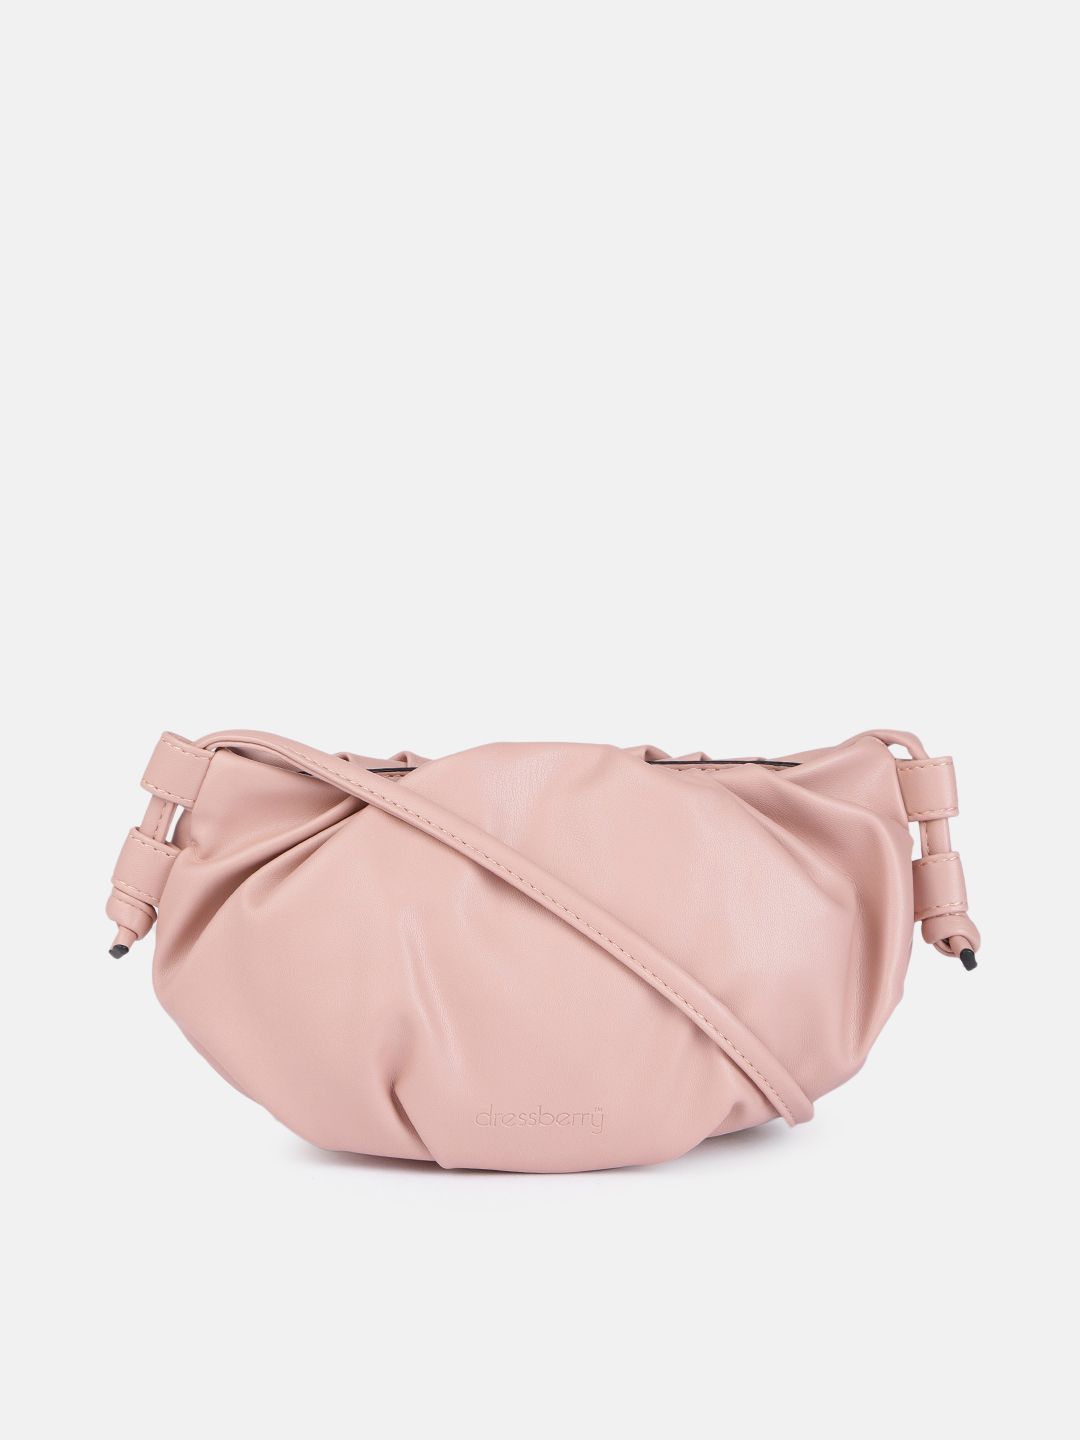 DressBerry Pink Solid Half Moon Sling Bag Price in India